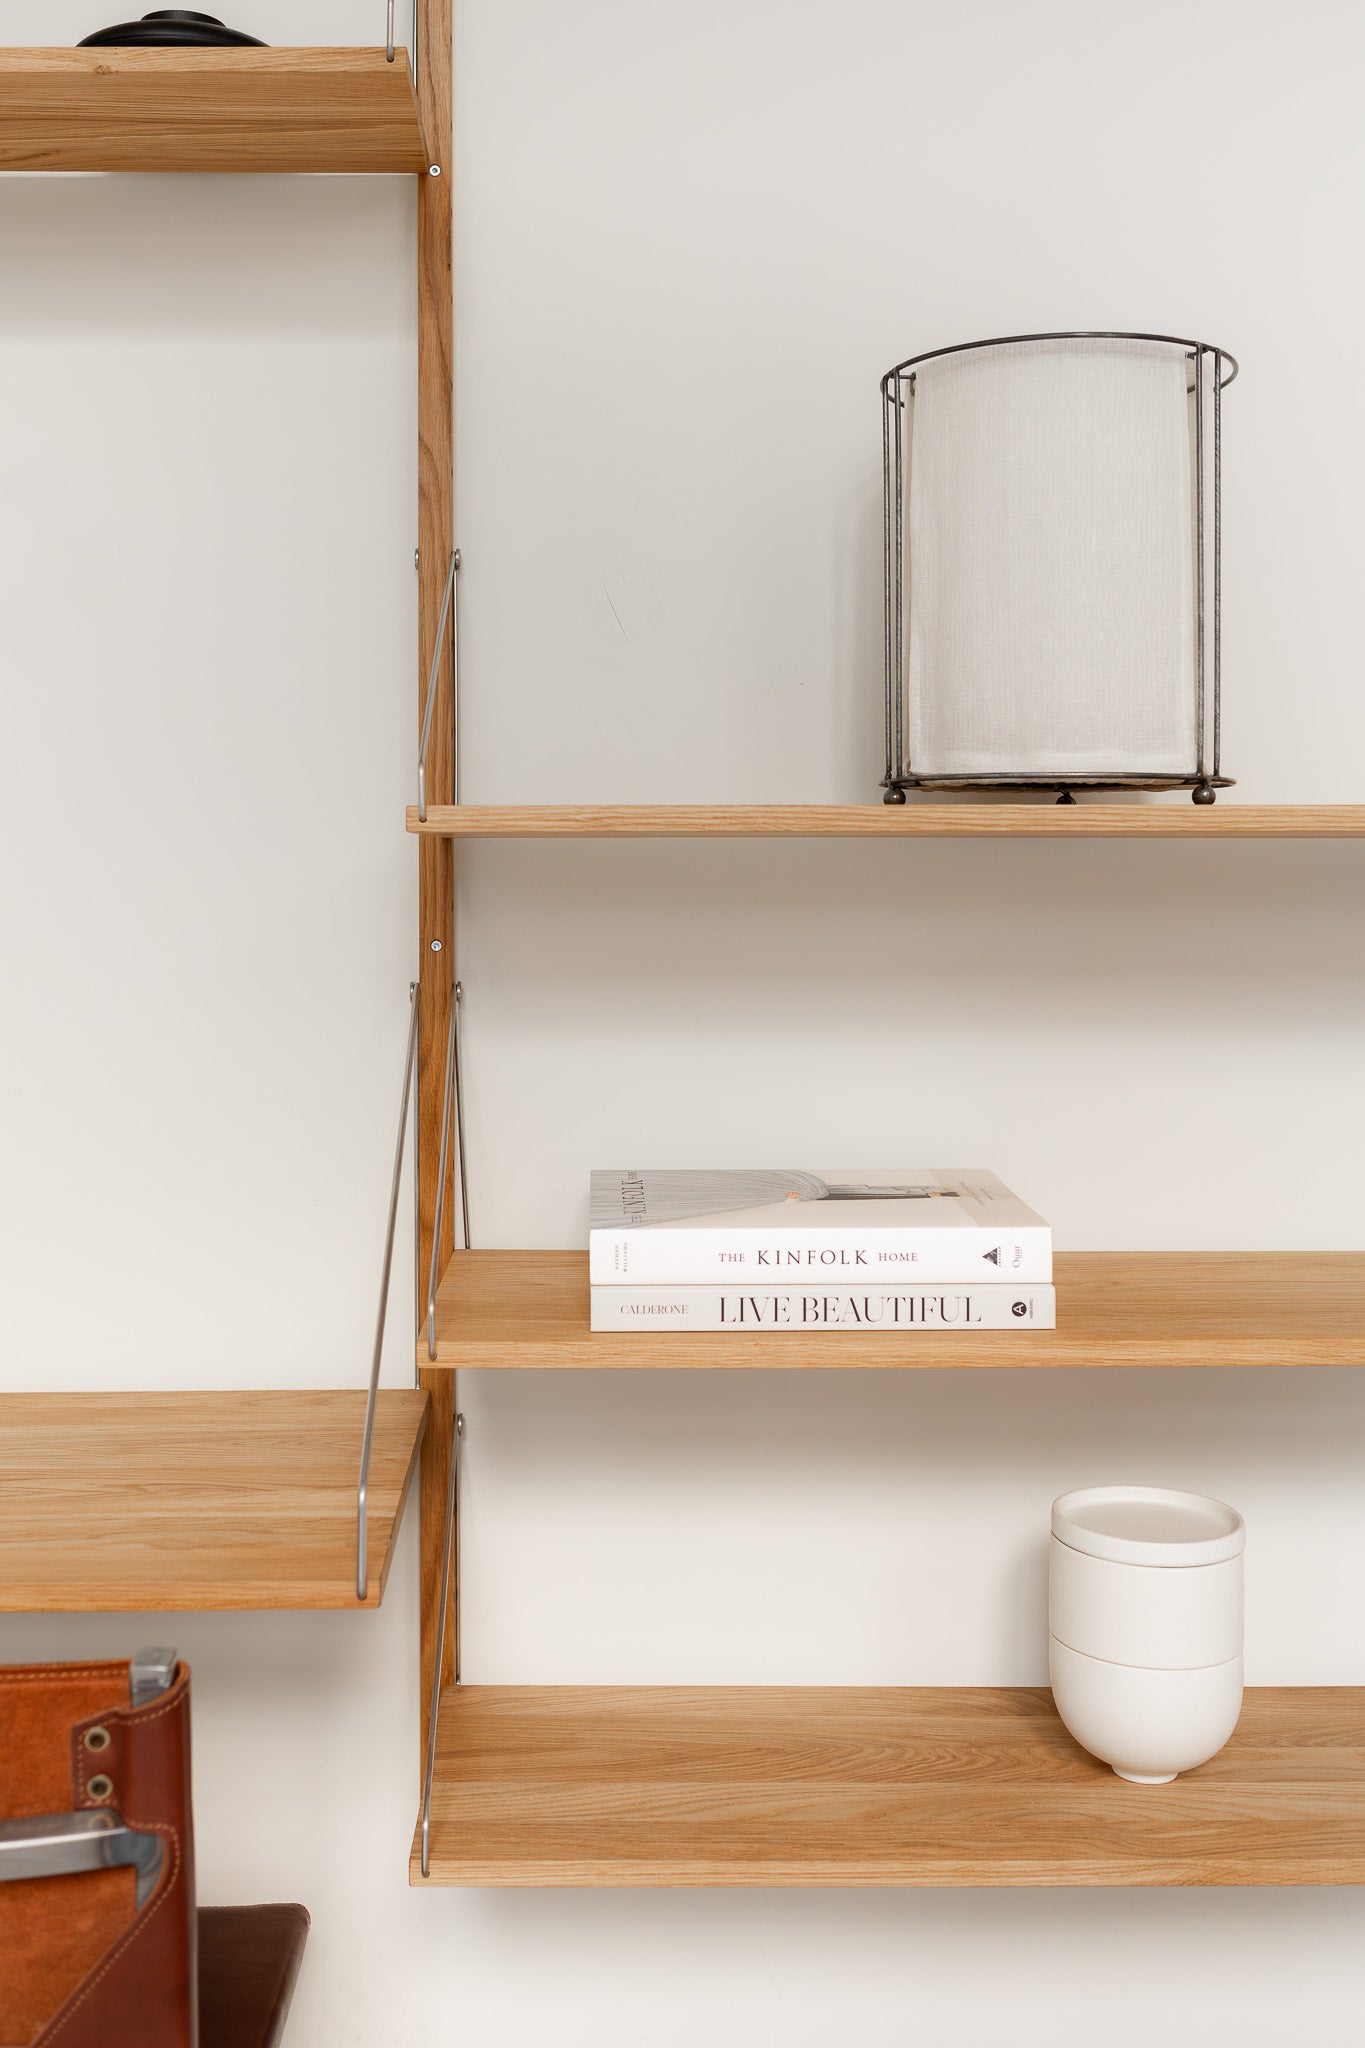 Shelf Library Natural Oak by Frama with decoration details